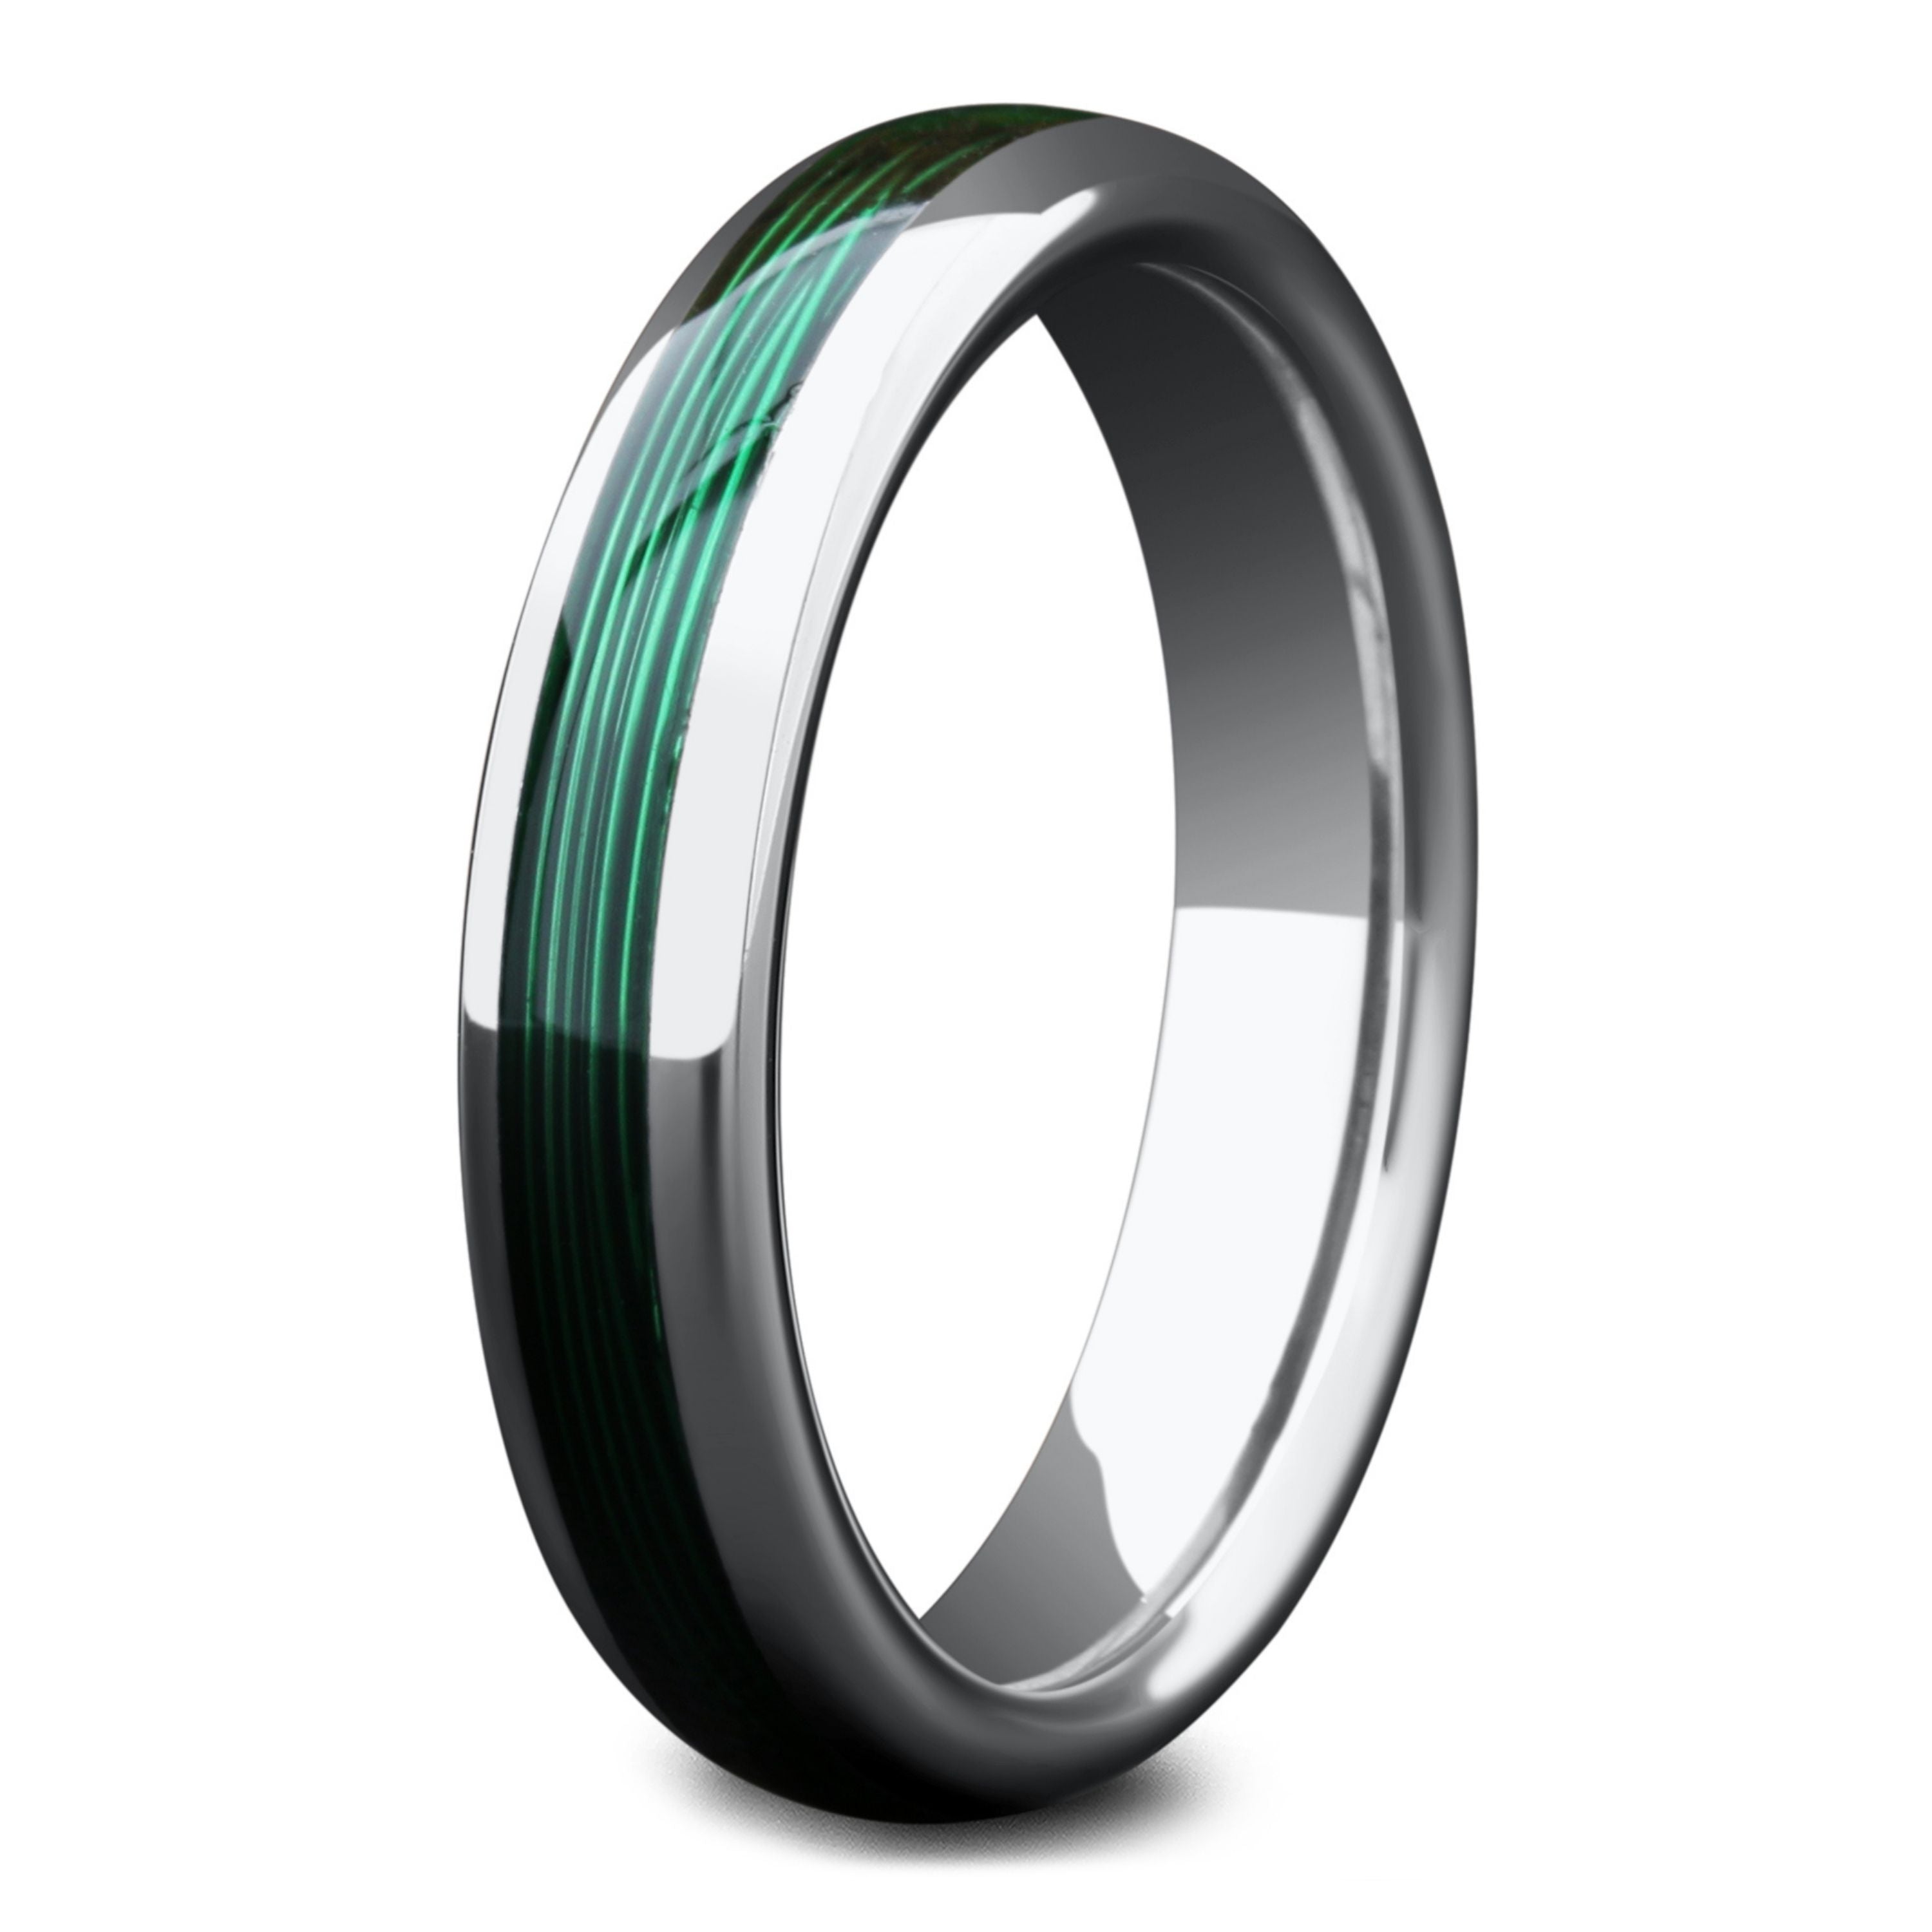 Forest Green Titanium Fishing Line Ring Custom Made Bands Fly Fishing USA Made To Order Fast